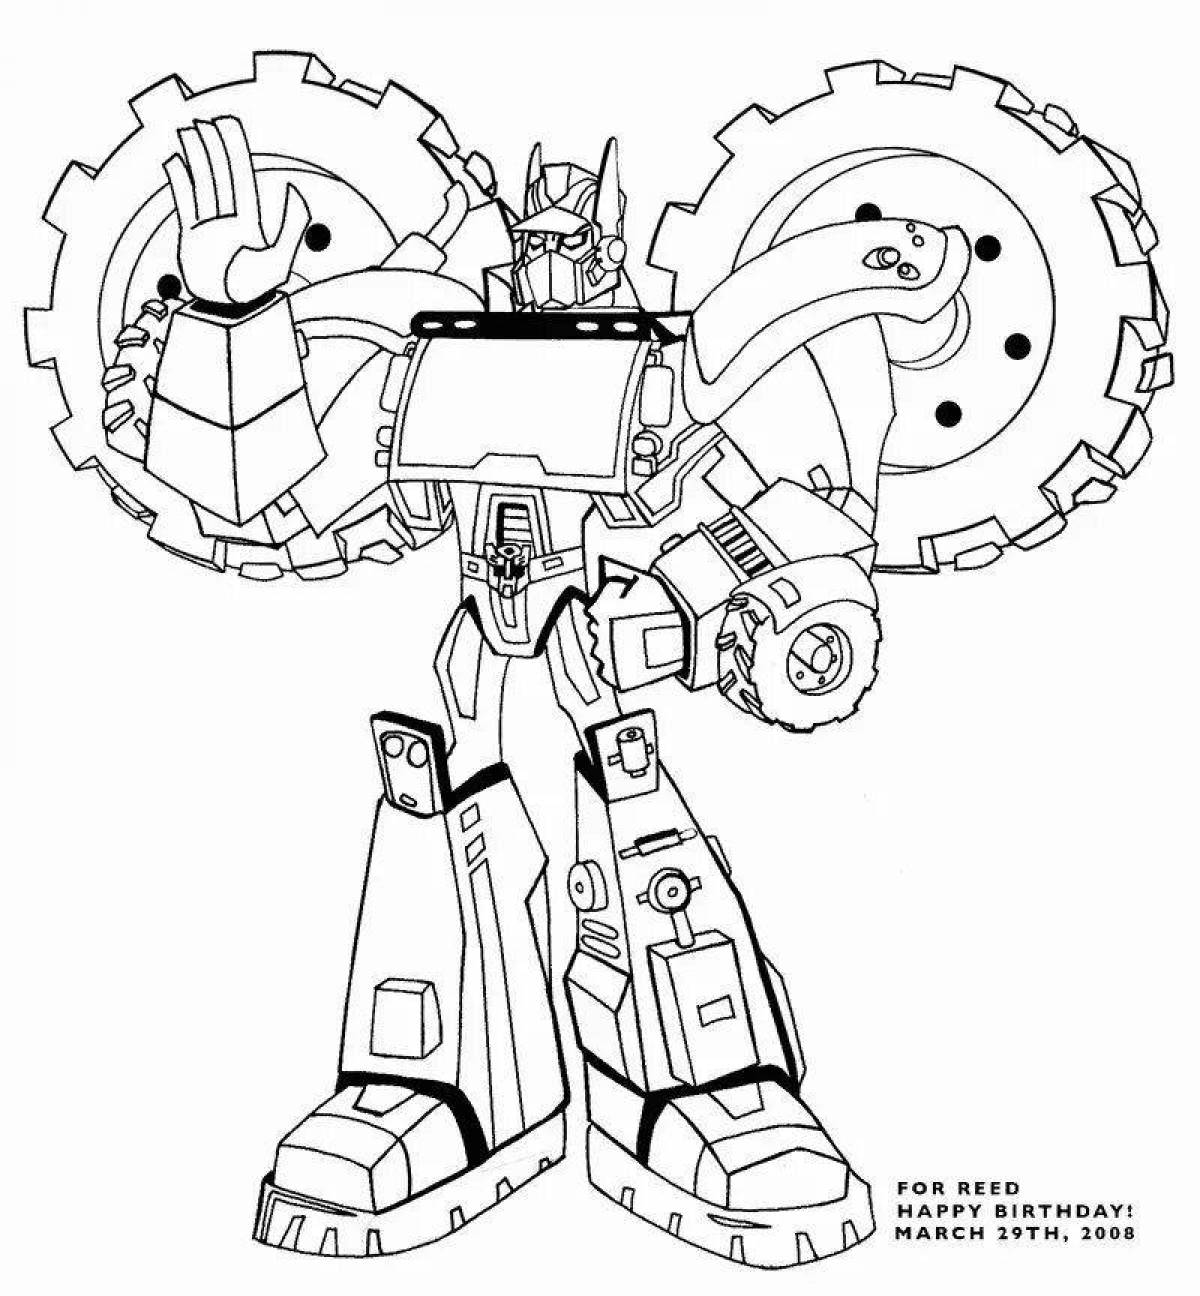 Galactic robot detectives intricate coloring book